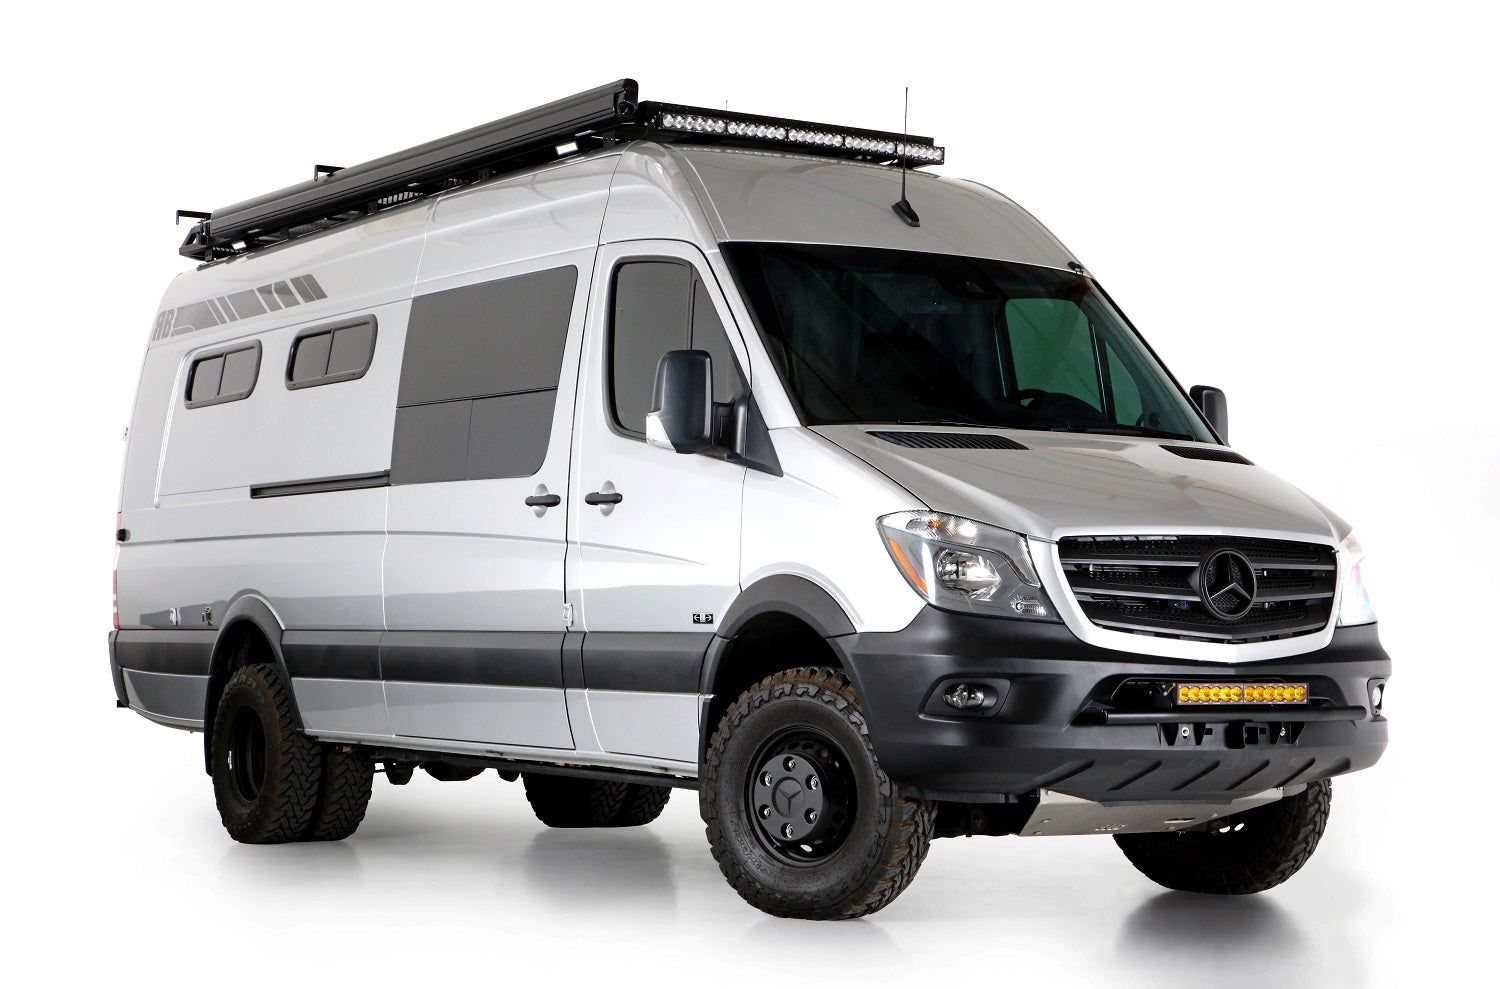 RB Touring Van FG - 170 EXT 3500 4x4 - RB Components